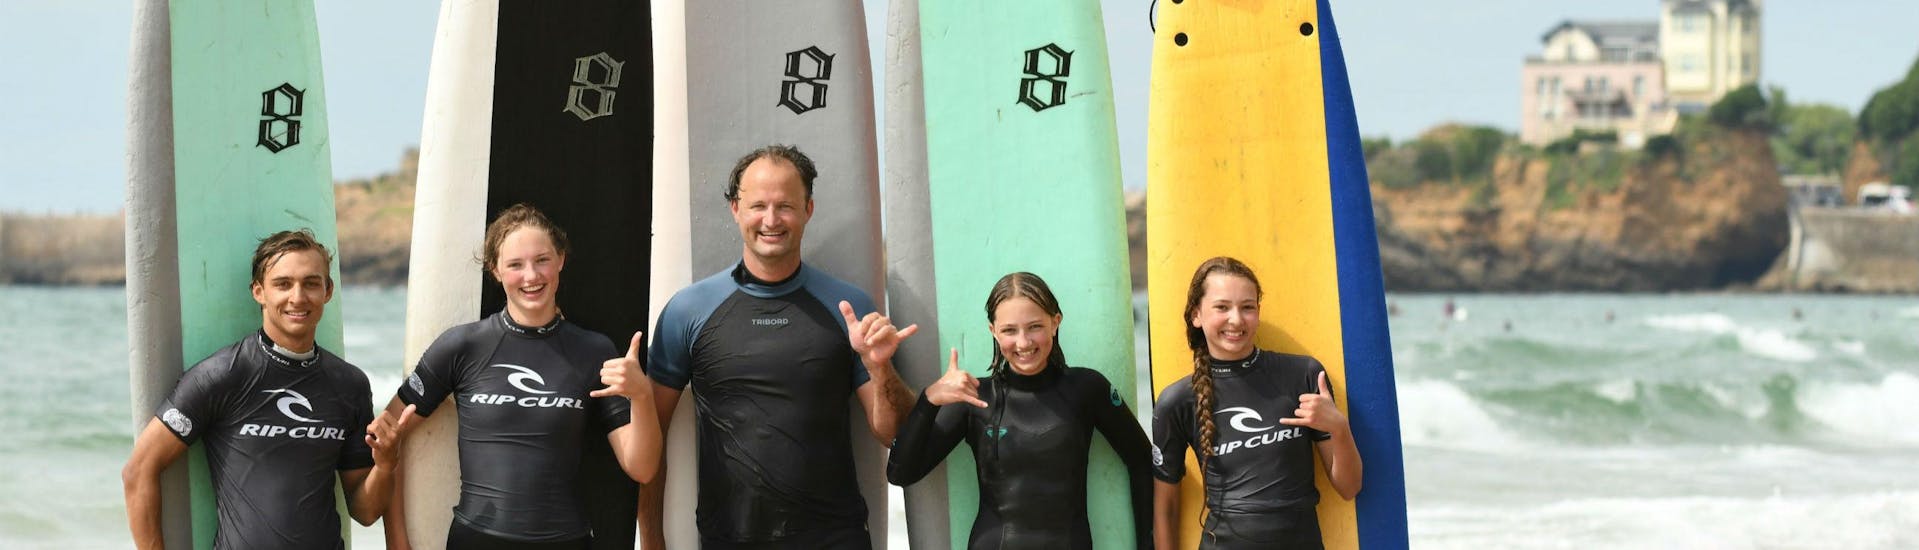 A group of people is having Surfing Lessons on the Marbella Beach with their surfing instructor from the Eco surf school in Biarritz.